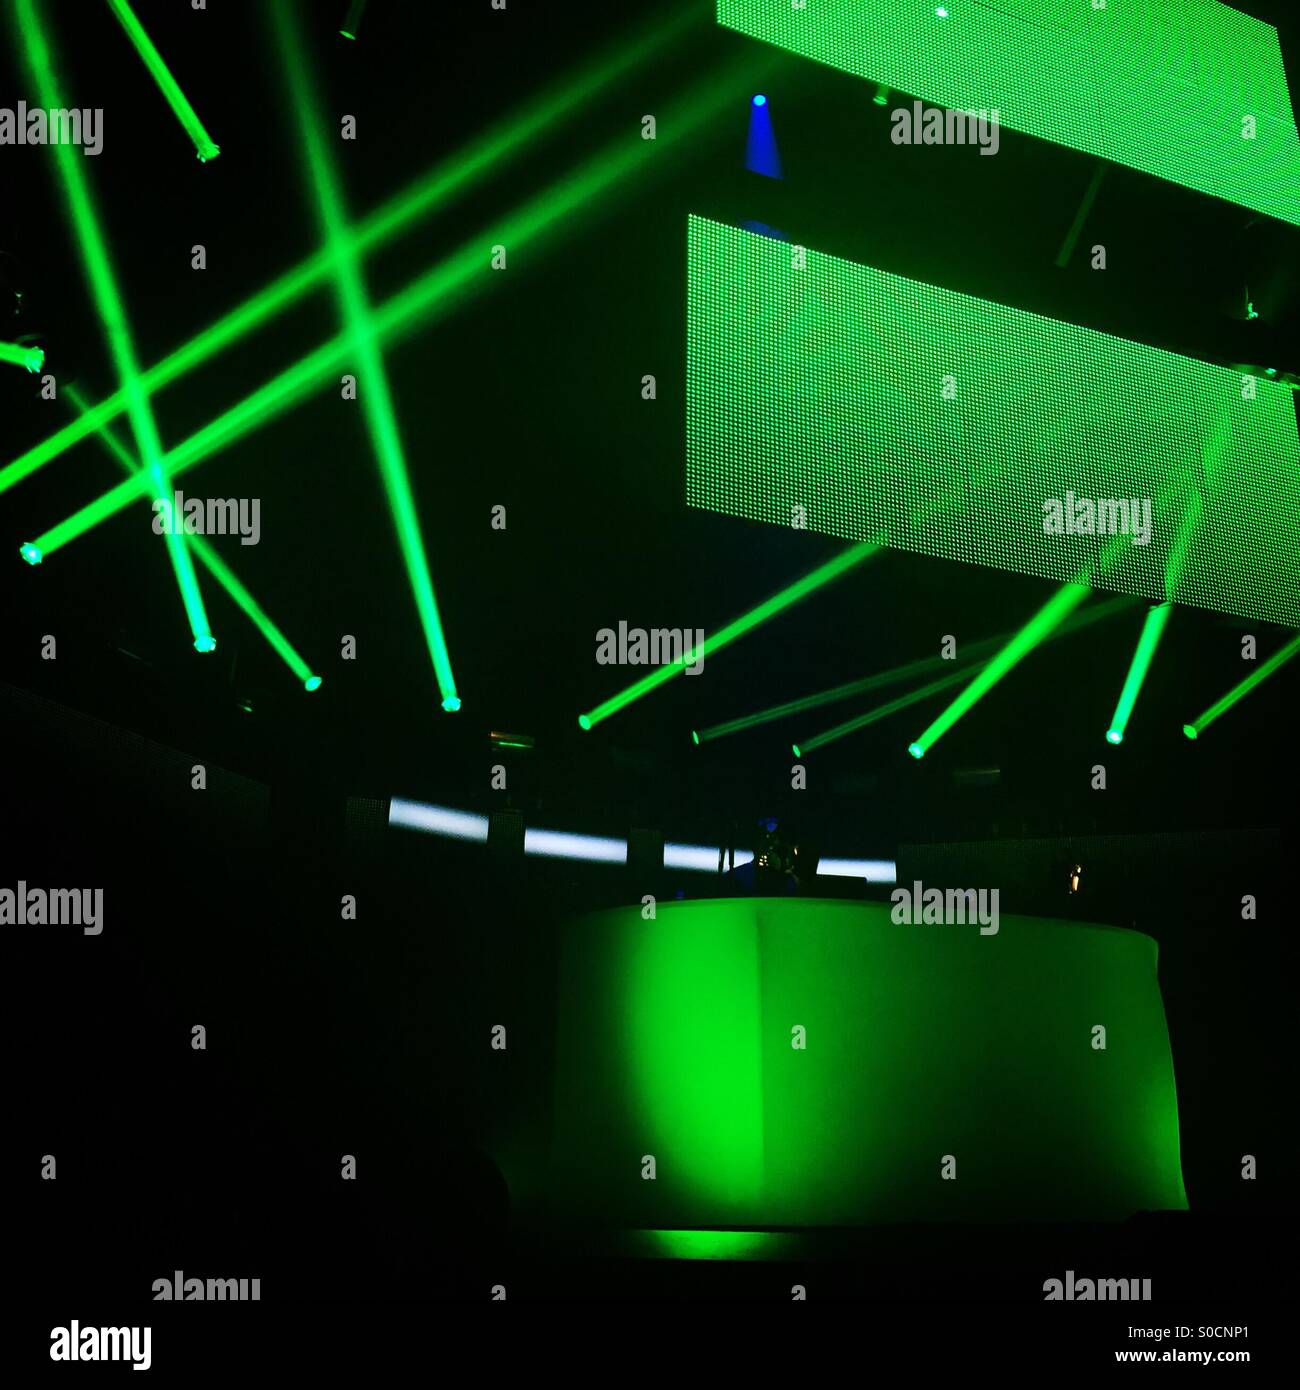 Green light display at a music concert Stock Photo